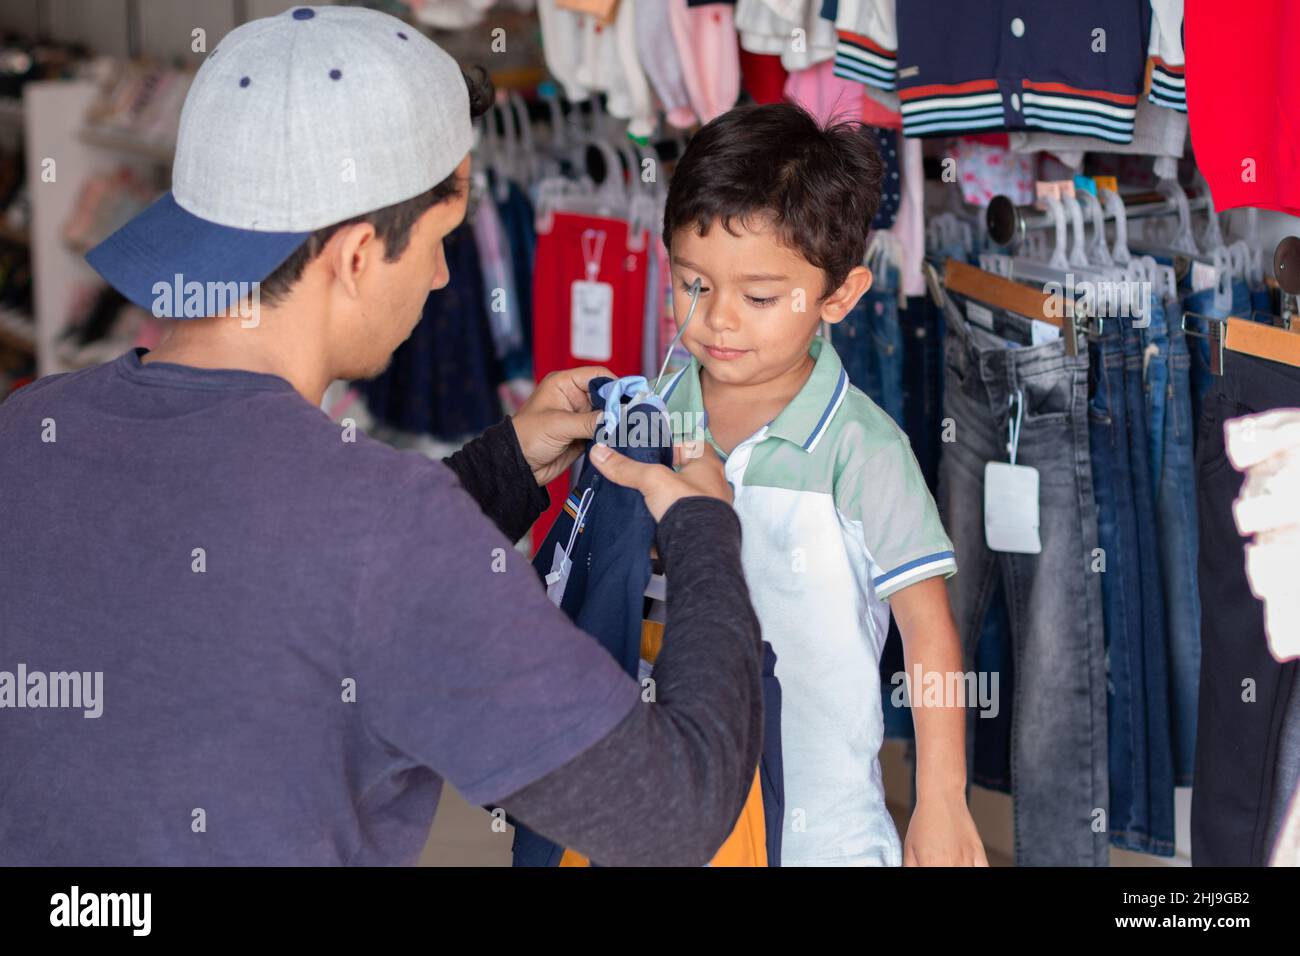 Young adult buying clothes for his son, latin man sizing a shirt or sweater for his son in a clothing store. Stock Photo